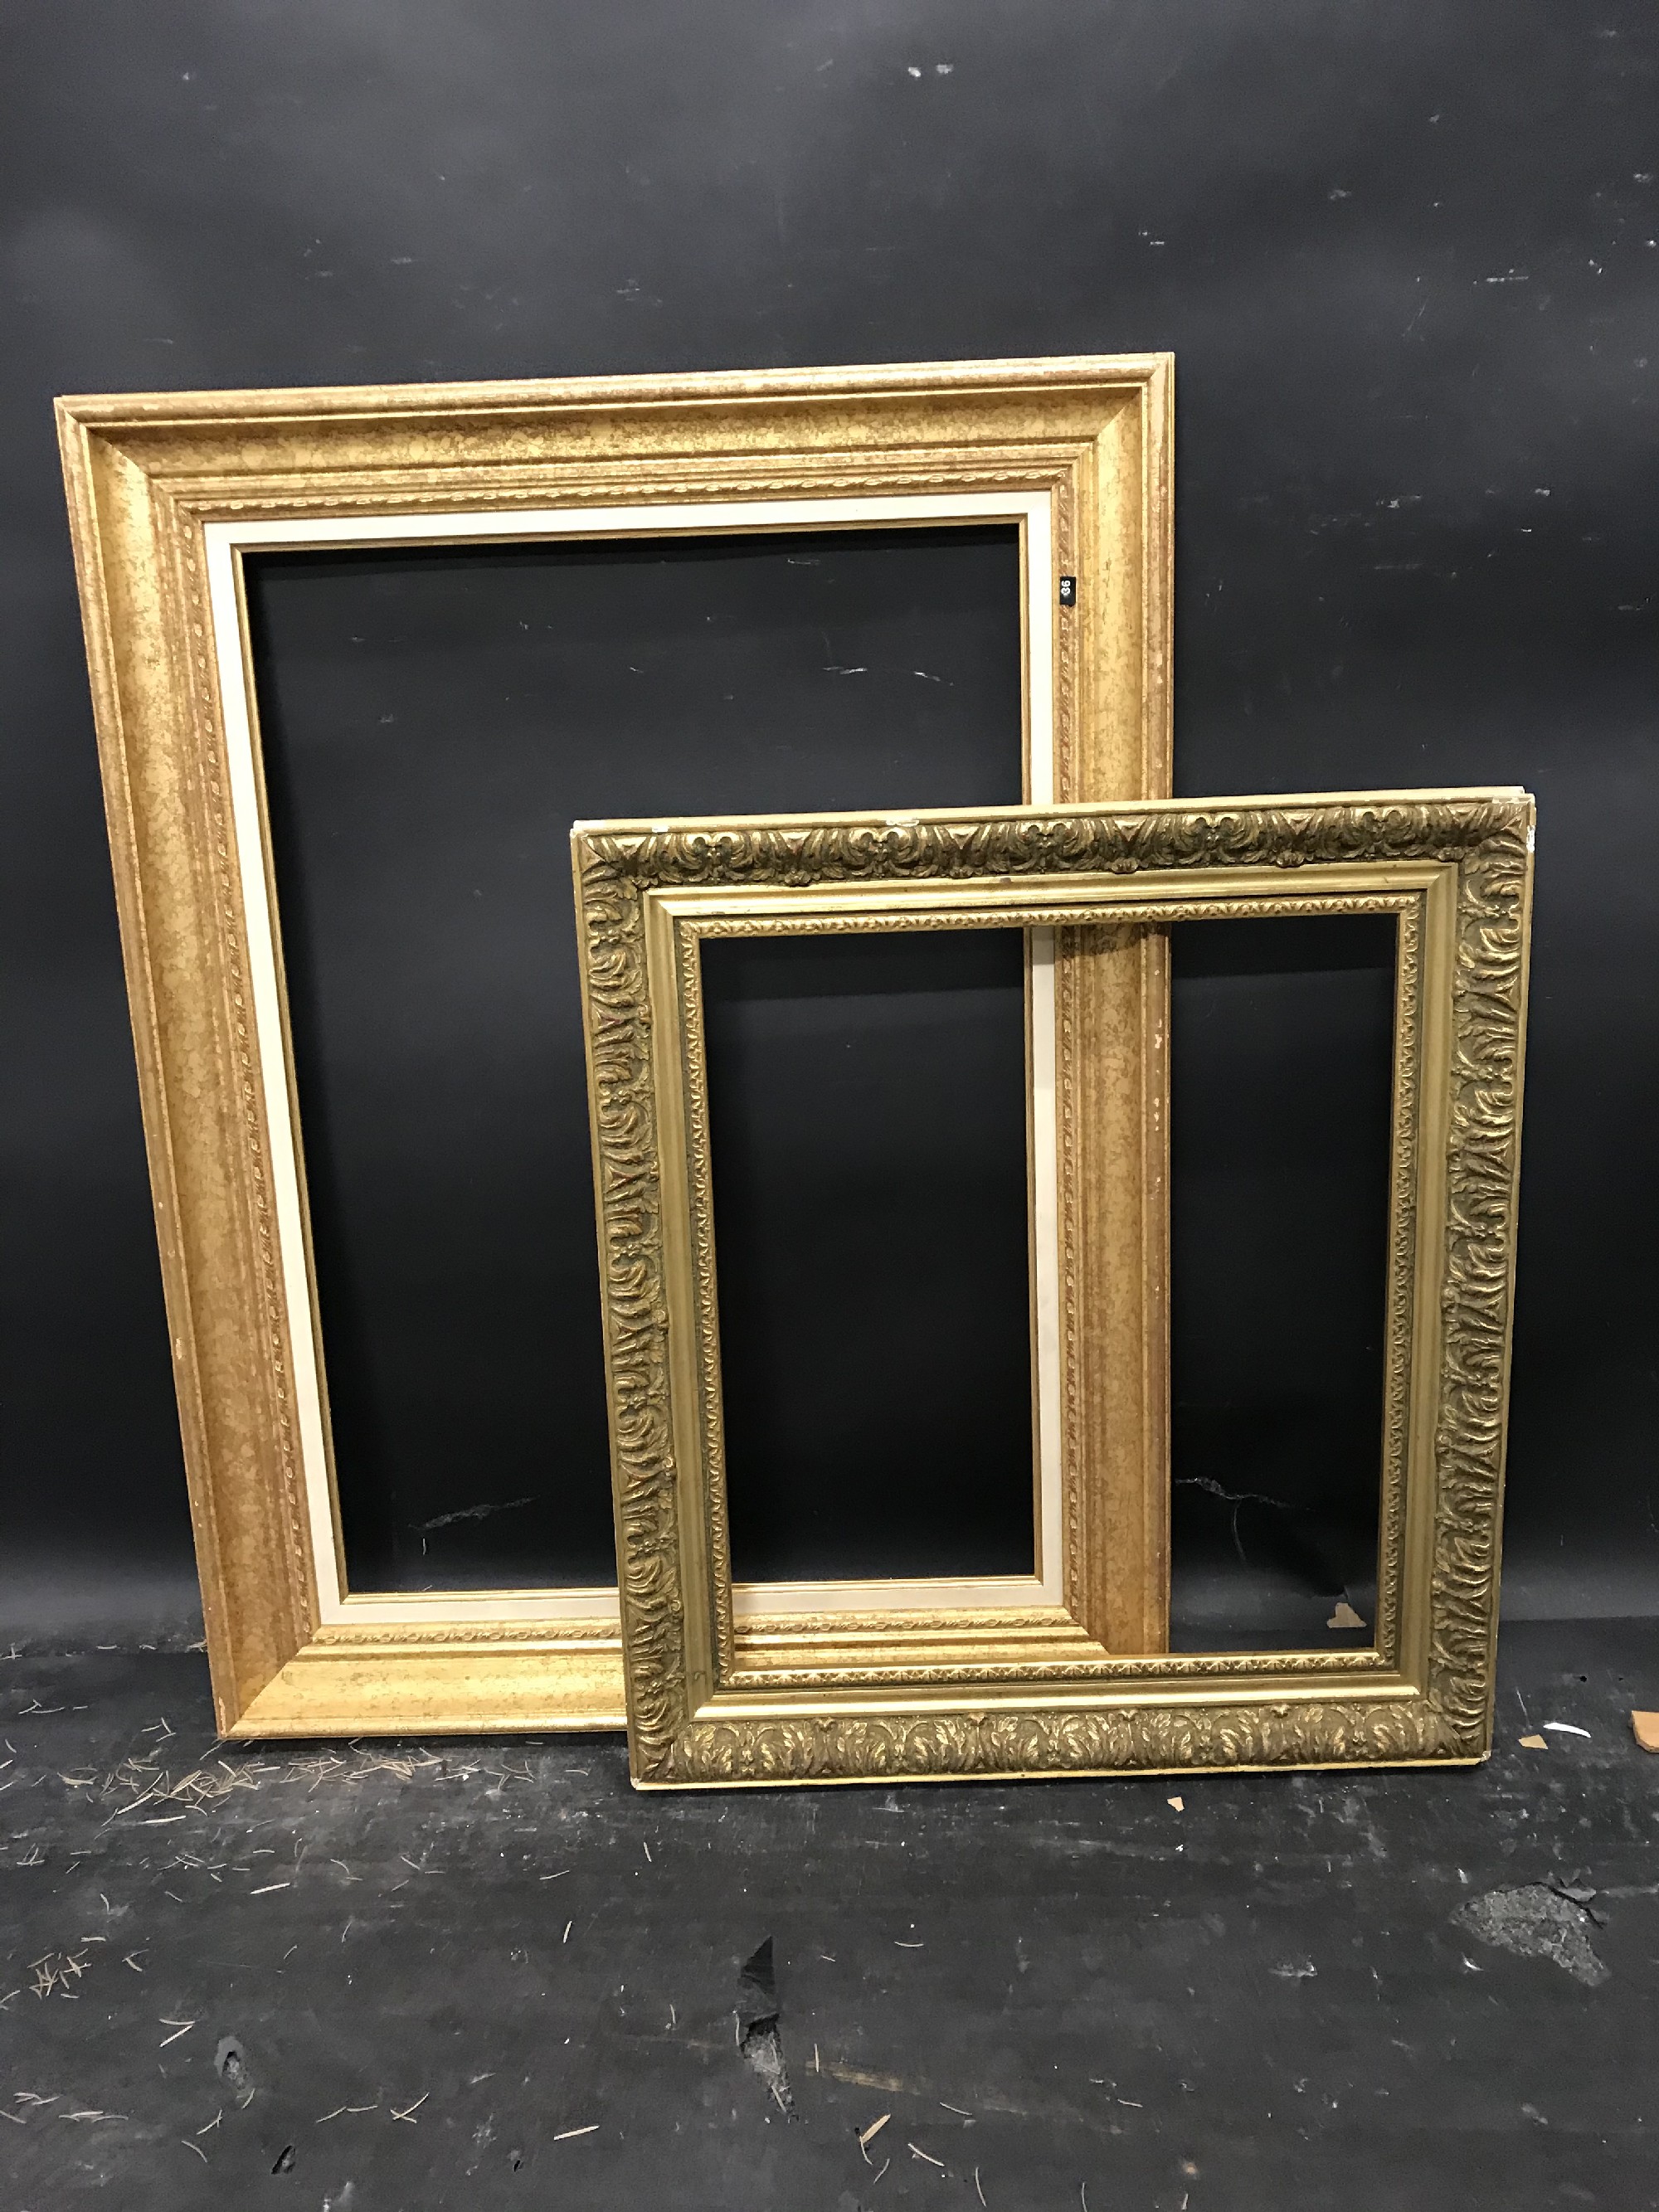 20th Century French School. A Gilt Composition Frame, with a white Slip, 21.5" x 15", and another - Image 2 of 3